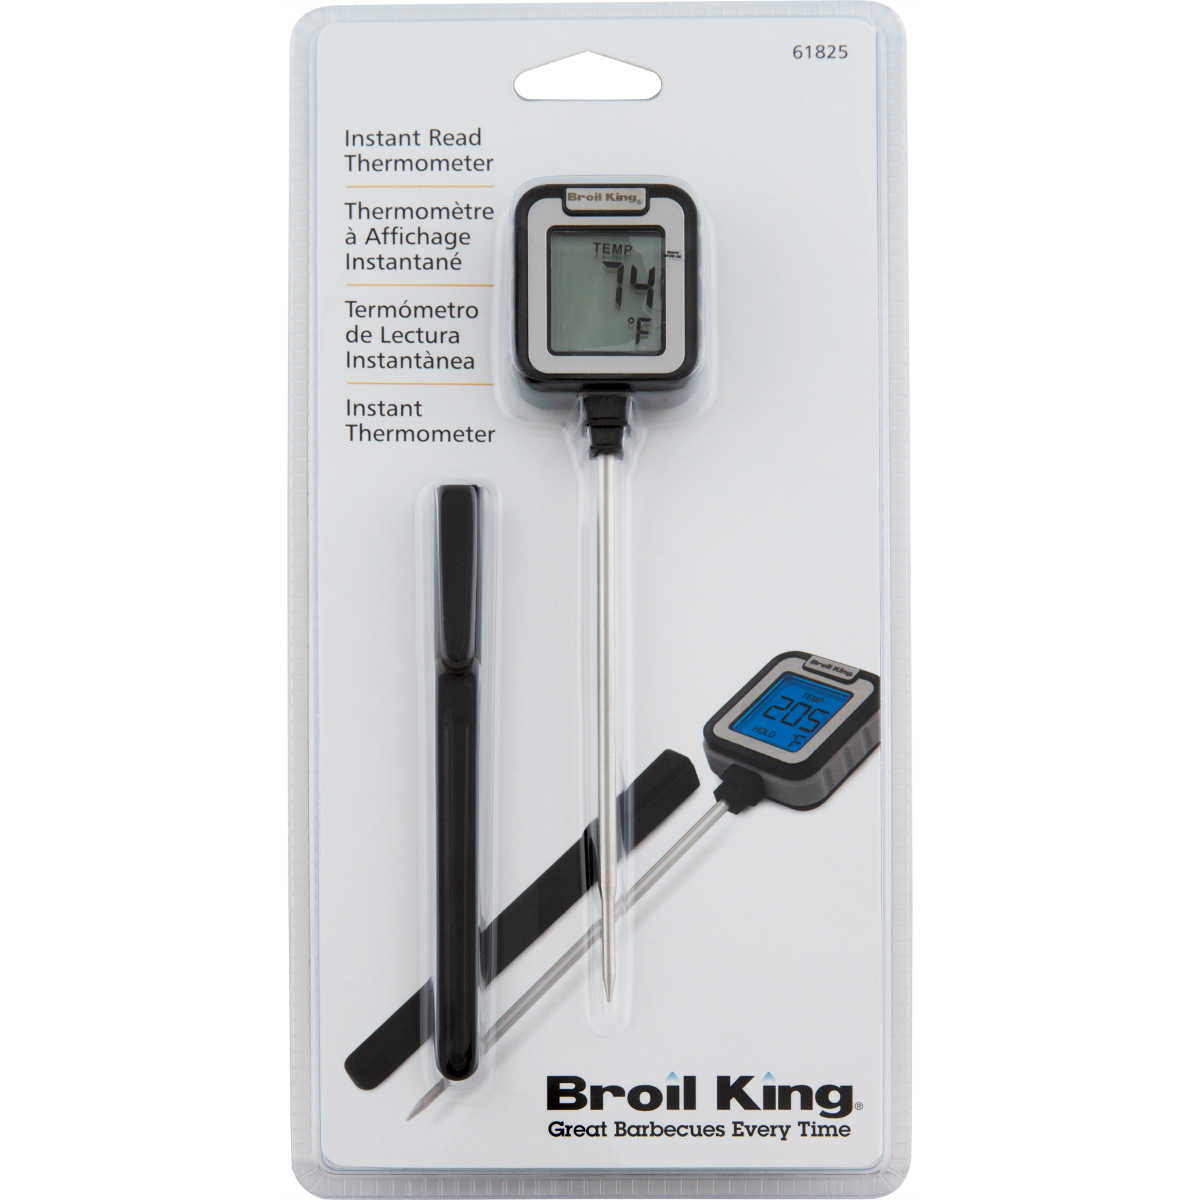 Broil King Instant Thermometer, Einstichthermometer - Verpackung